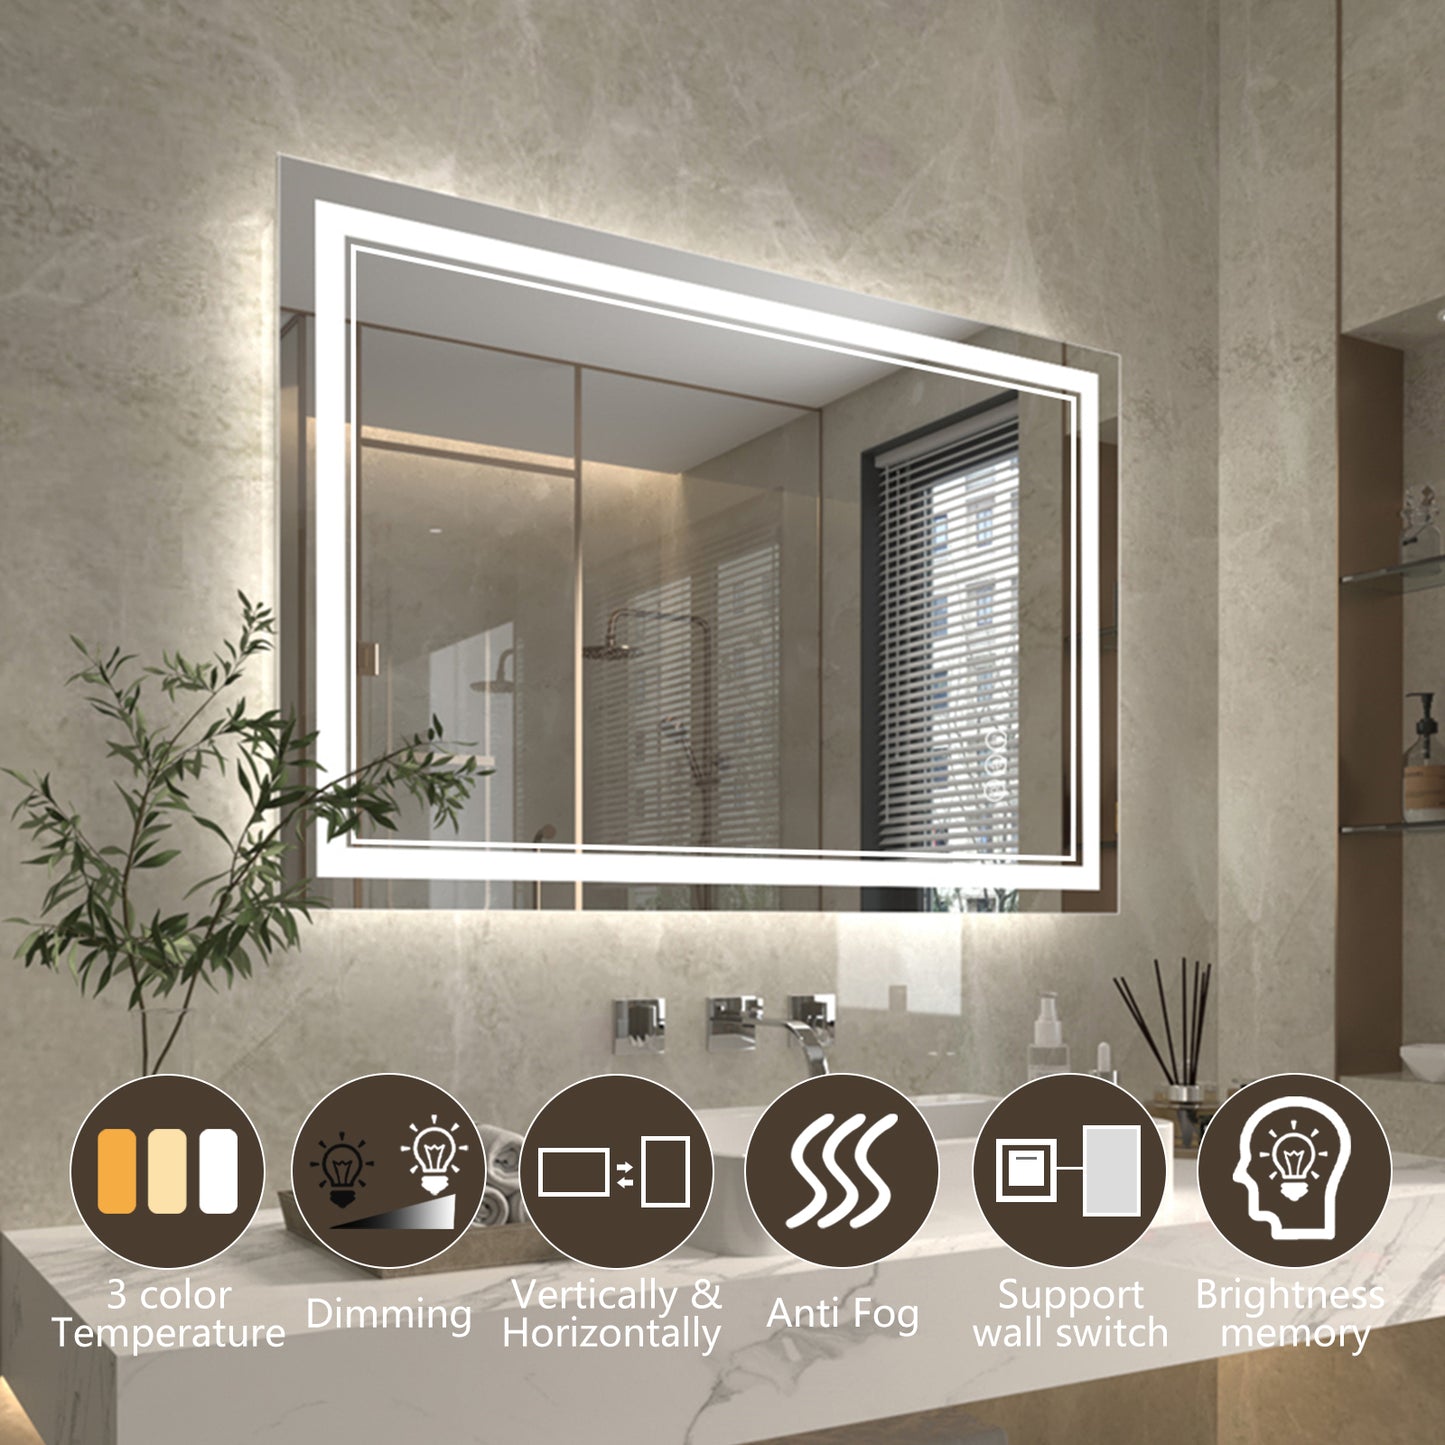 Linea 48" W x 32" H LED Heated Bathroom Mirror,Anti Fog,Dimmable,Front-Lighted and Backlit, Tempered Glass